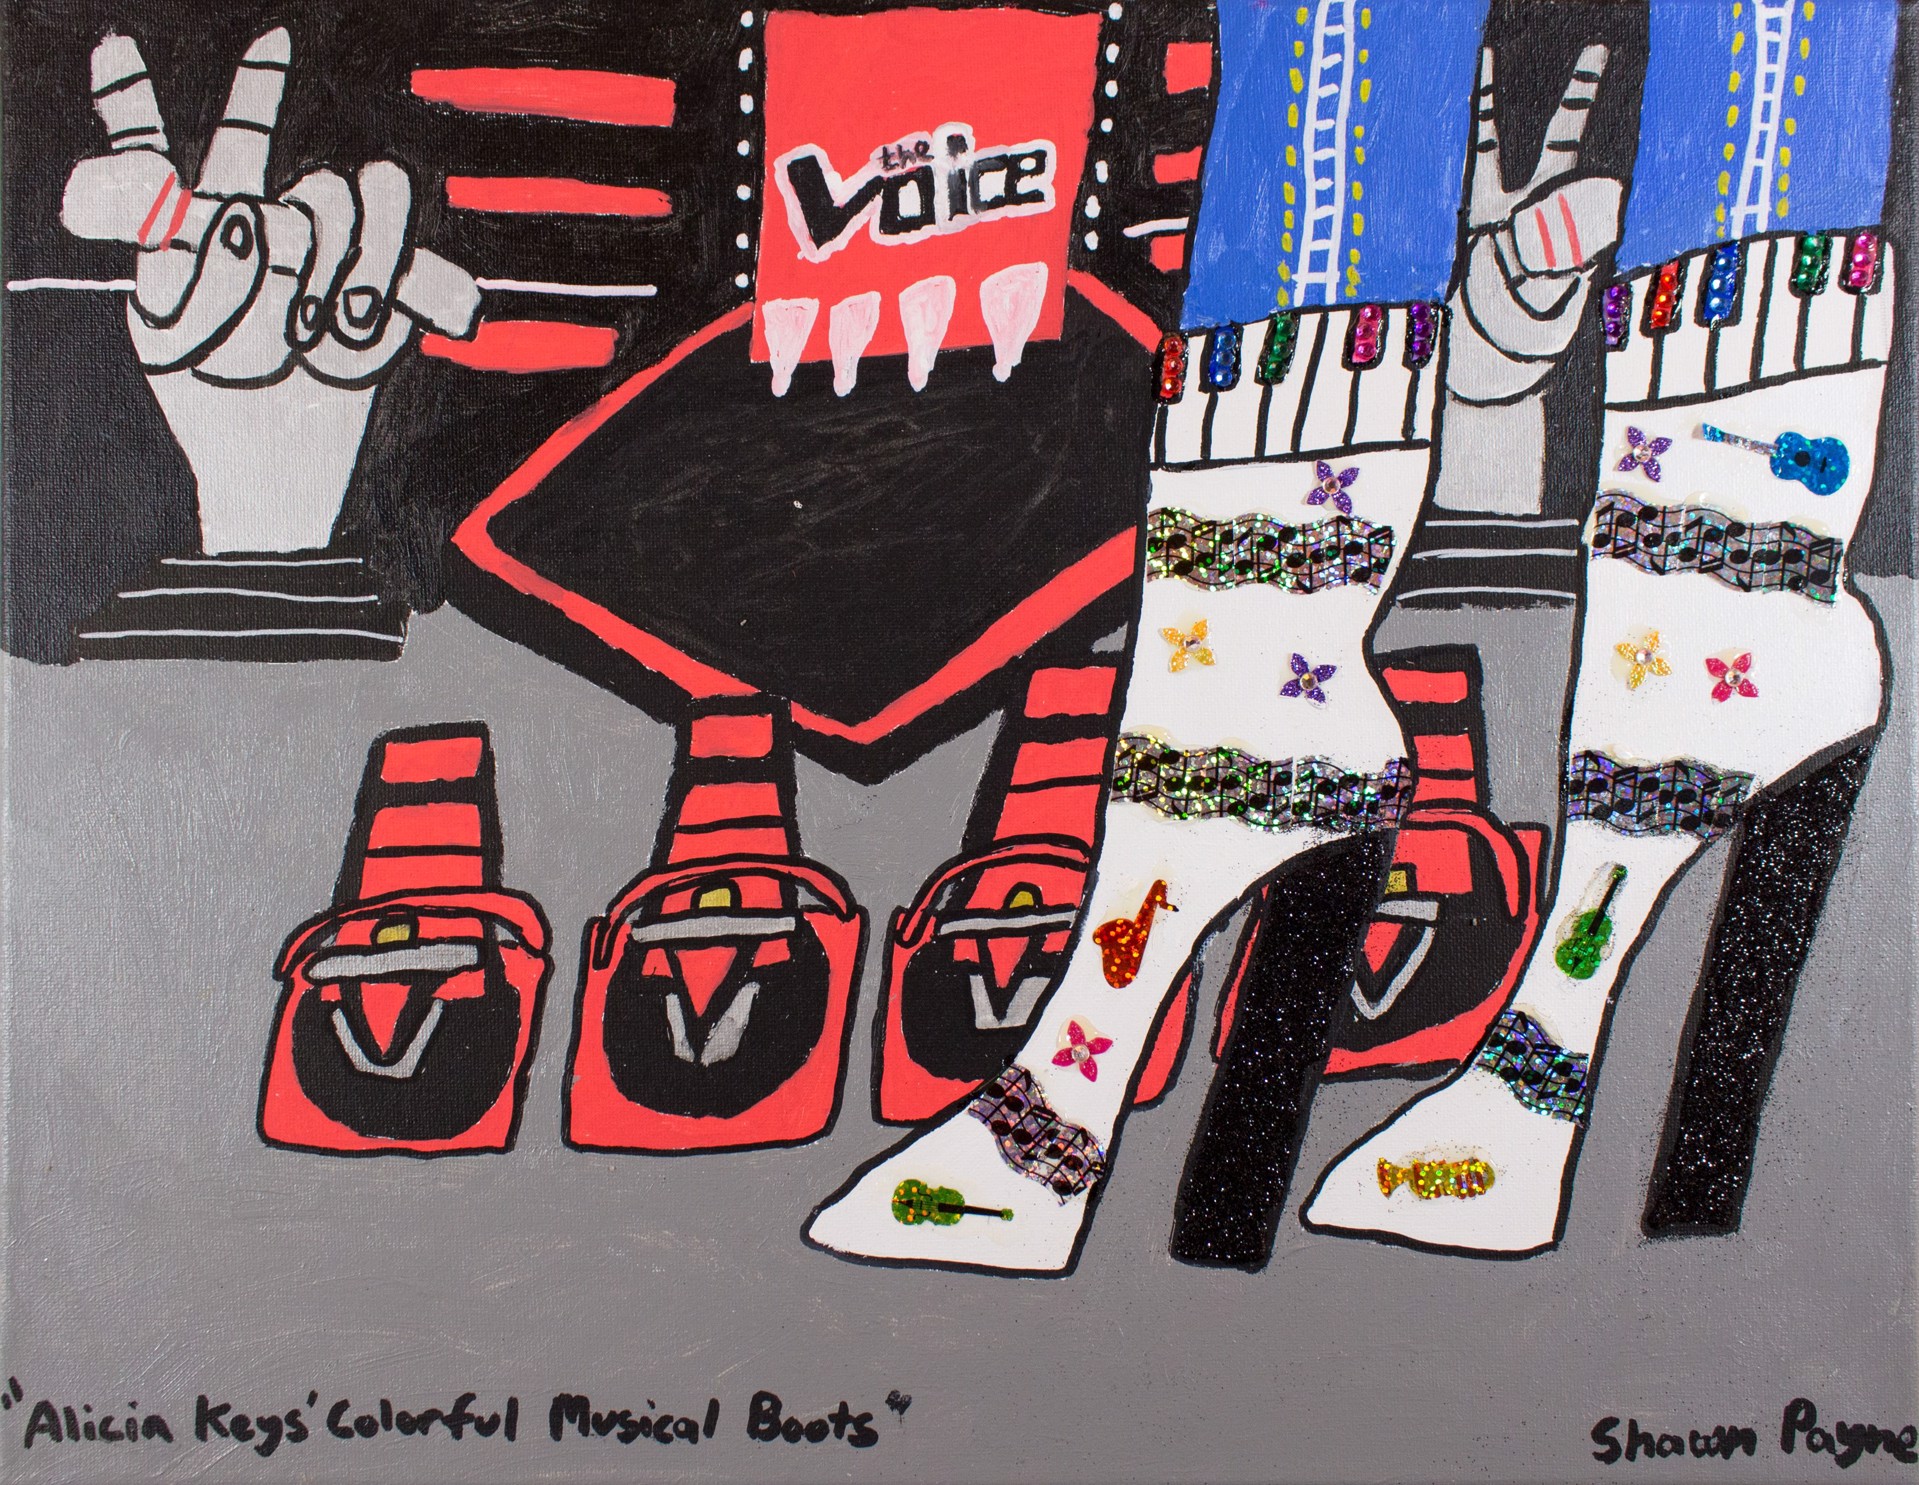 Alicia Key's Colorful Musical Boots by Shawn Payne